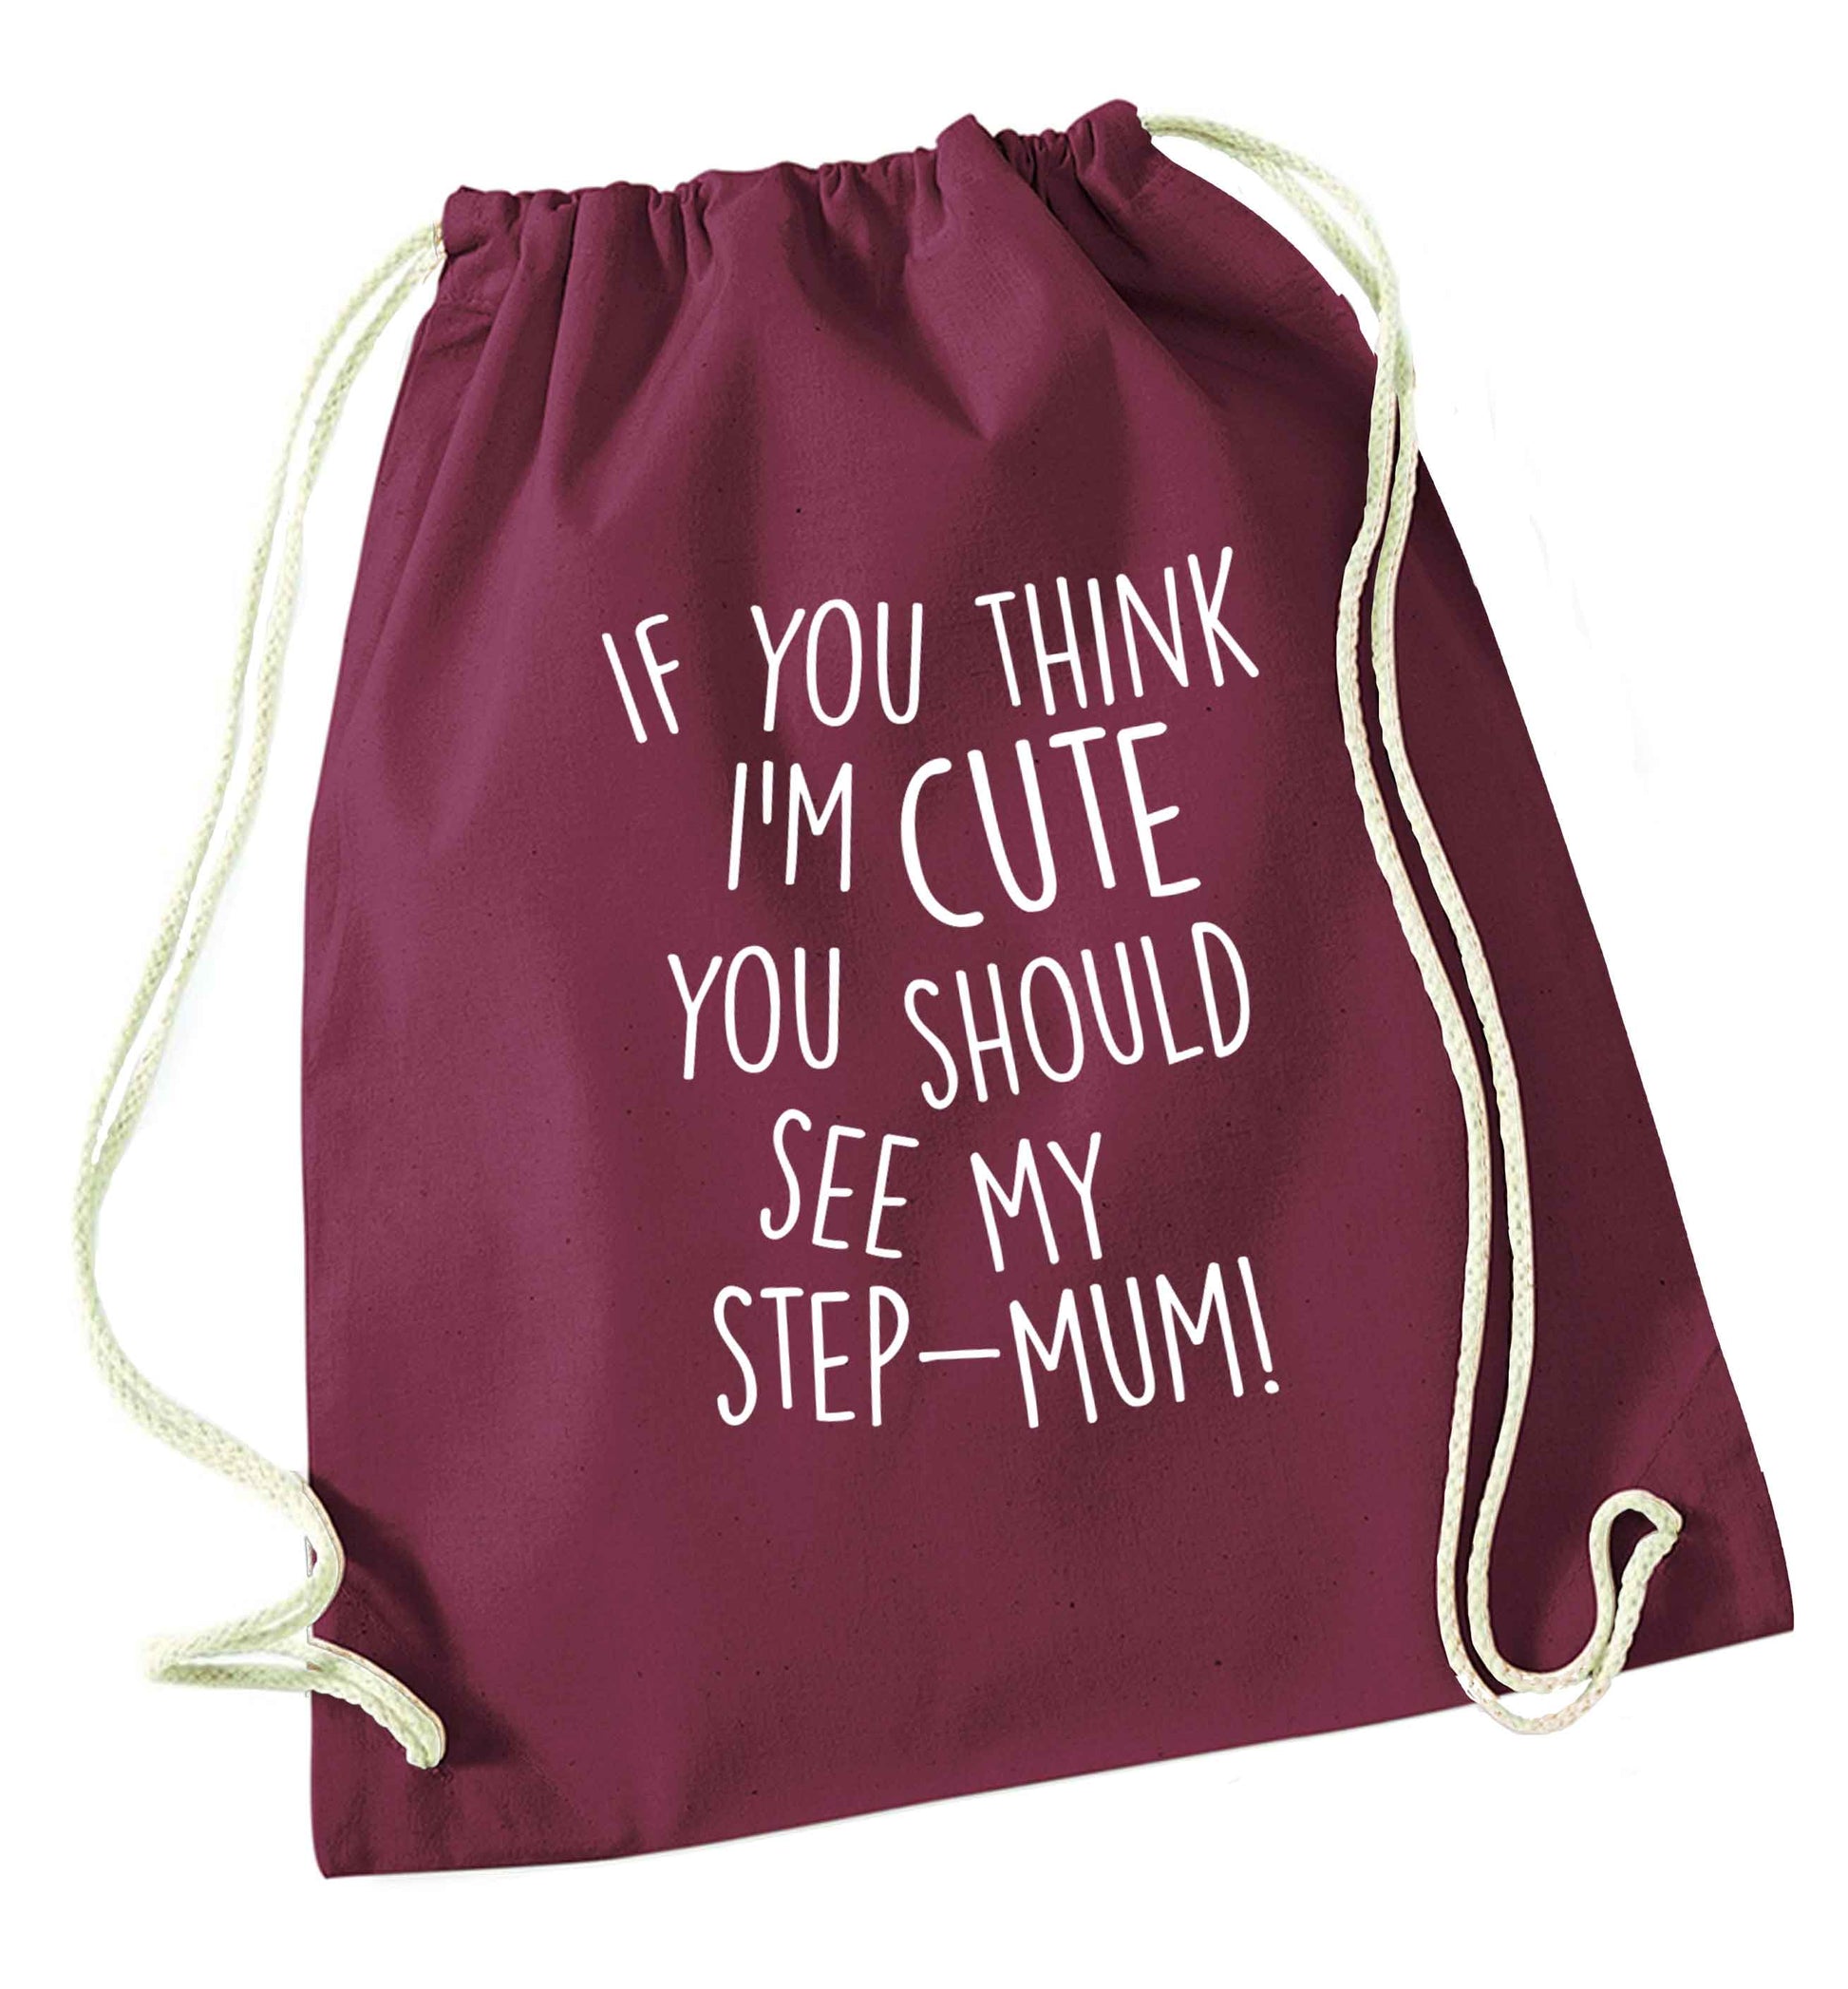 My step-mum loves me to the moon and back maroon drawstring bag